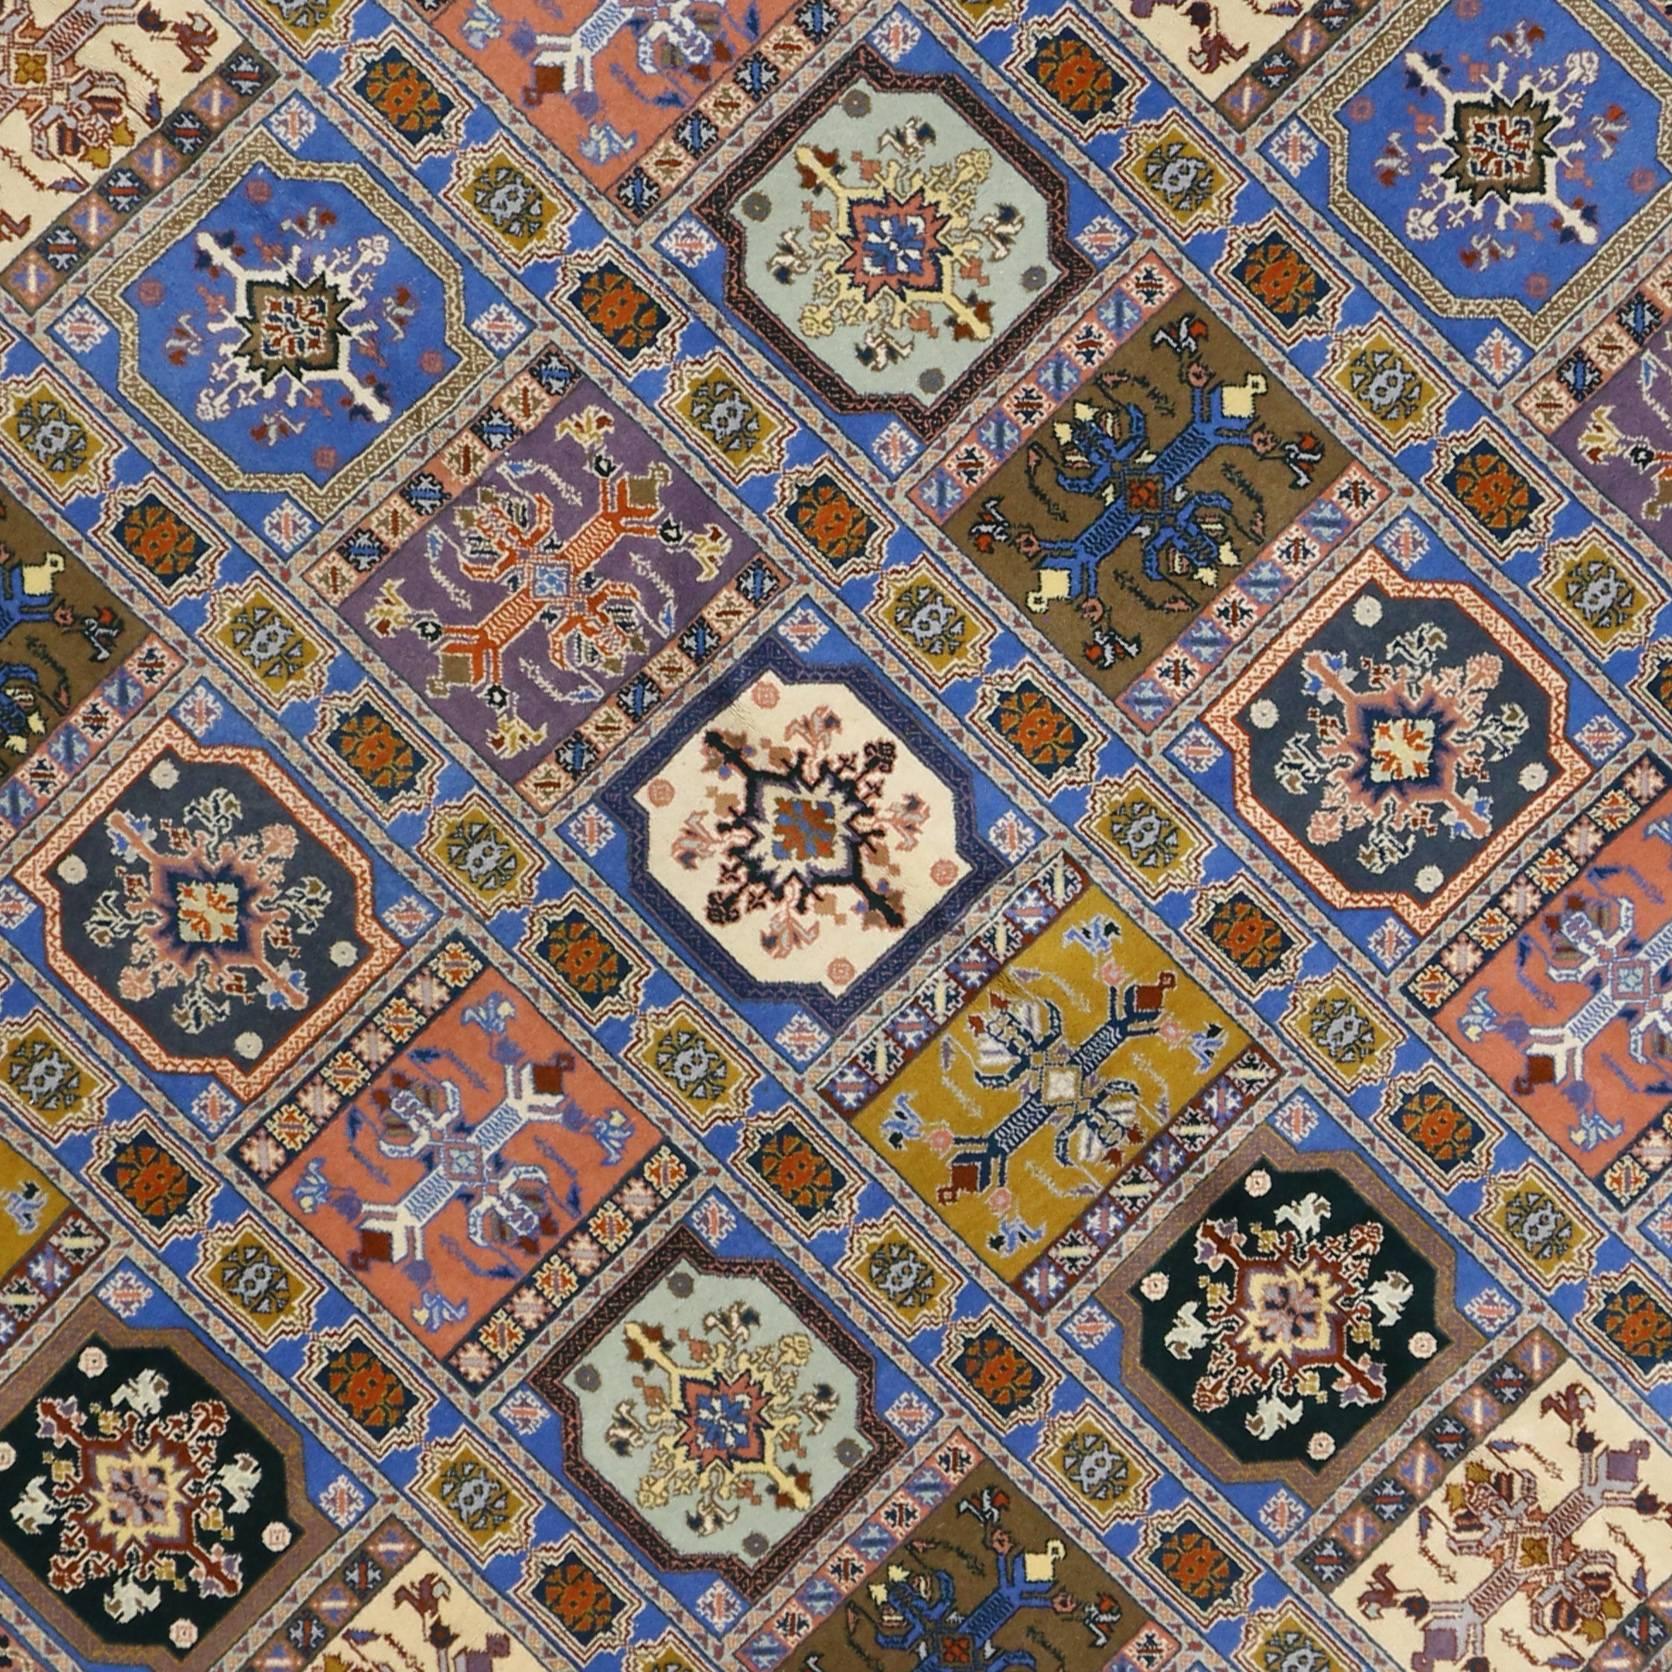 76491 Vintage Rabat Moroccan Rug with Transylvanian Anatolian Compartment Design. This hand-knotted wool vintage Rabat Moroccan rug beautifully highlights an Anatolian compartment of the past. Brilliant color and tribal allure collide in this Rabat